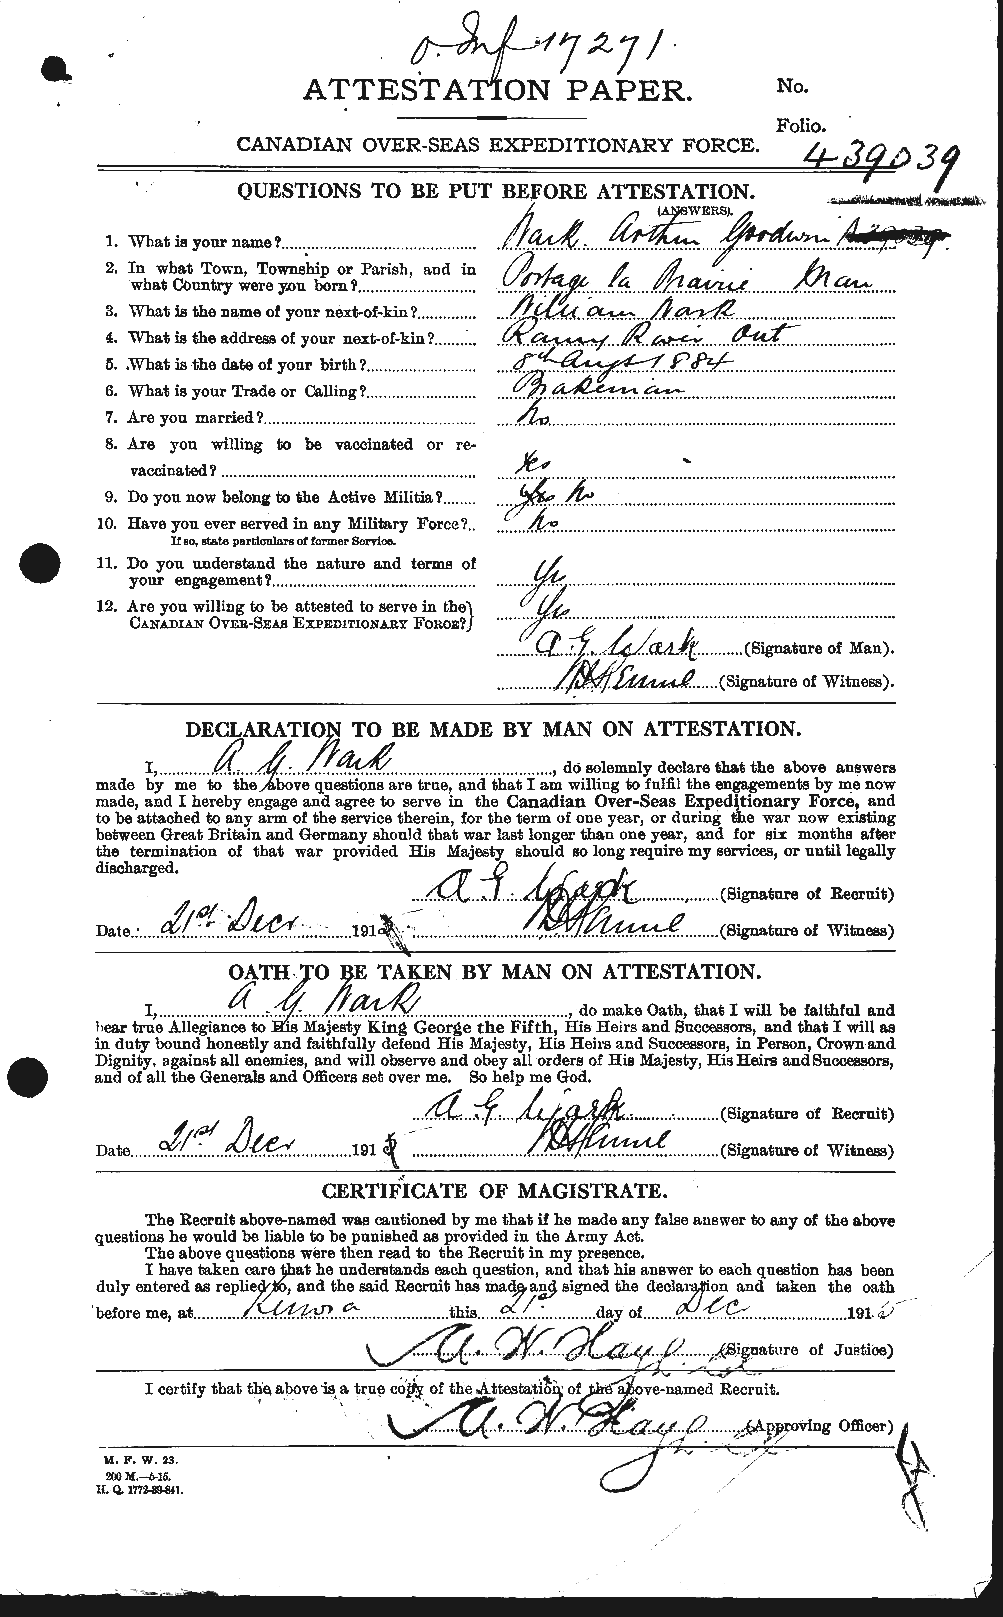 Personnel Records of the First World War - CEF 657168a